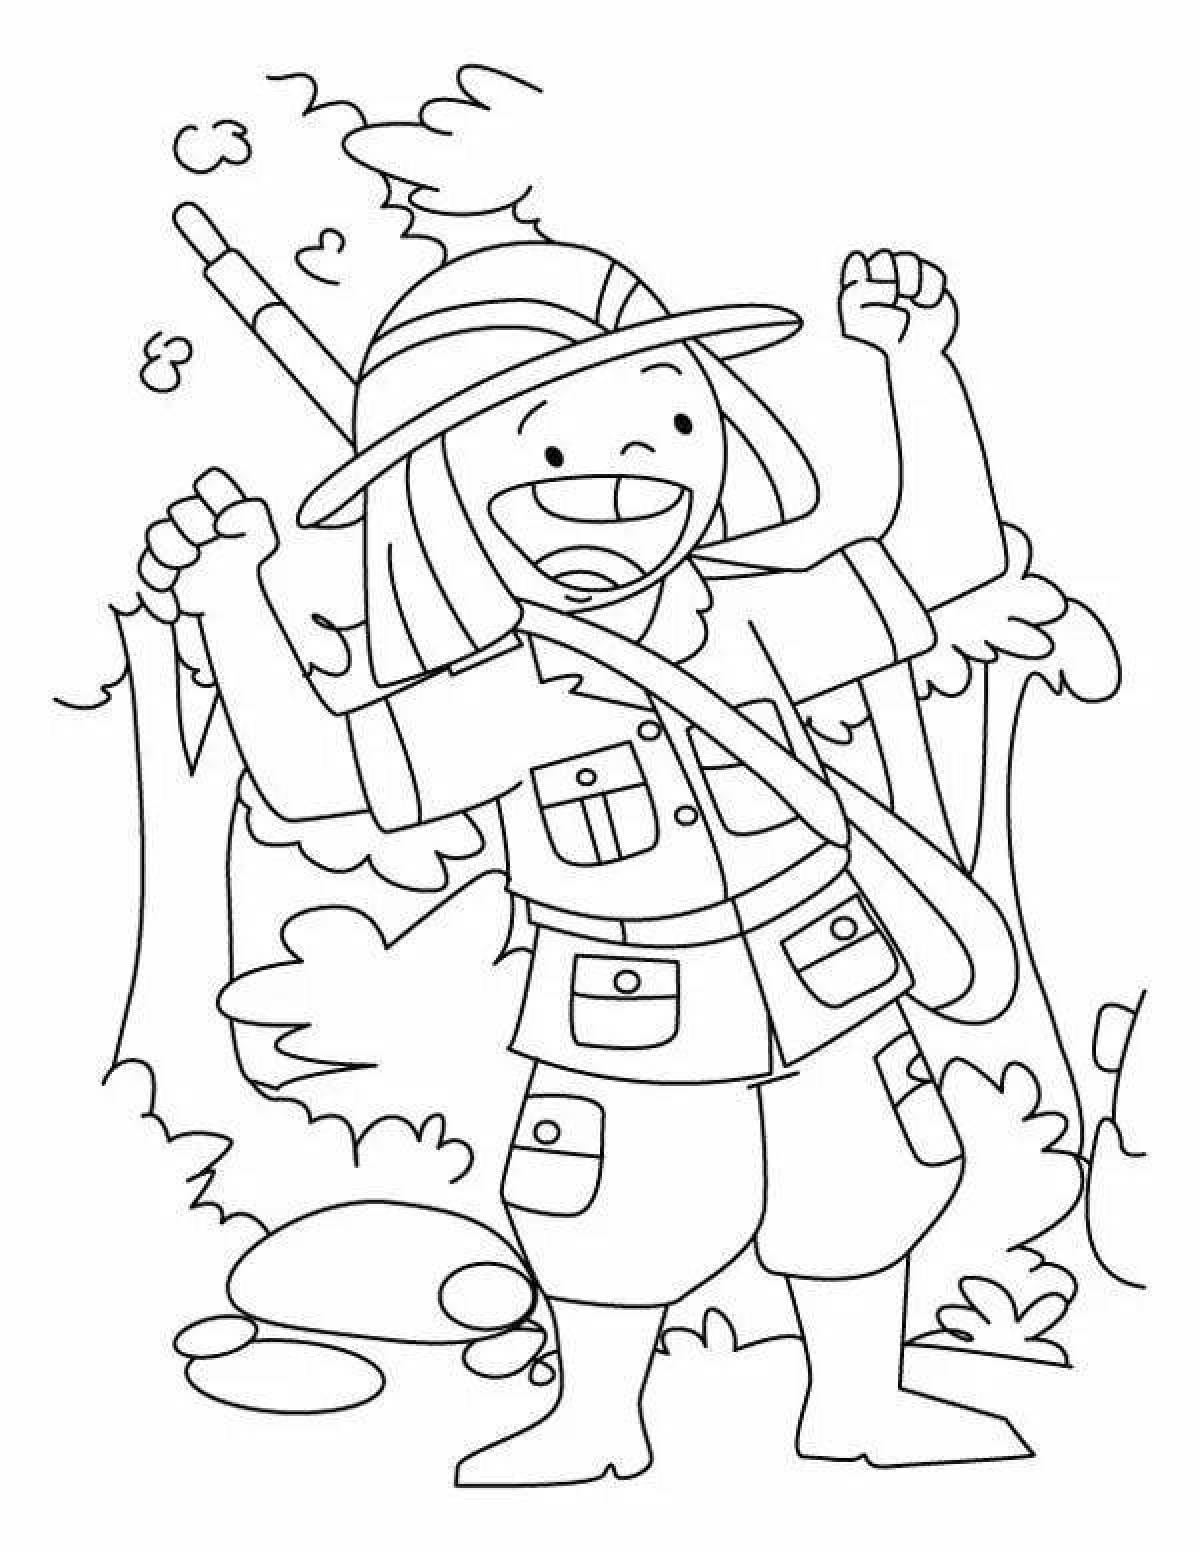 Experienced hunter coloring page